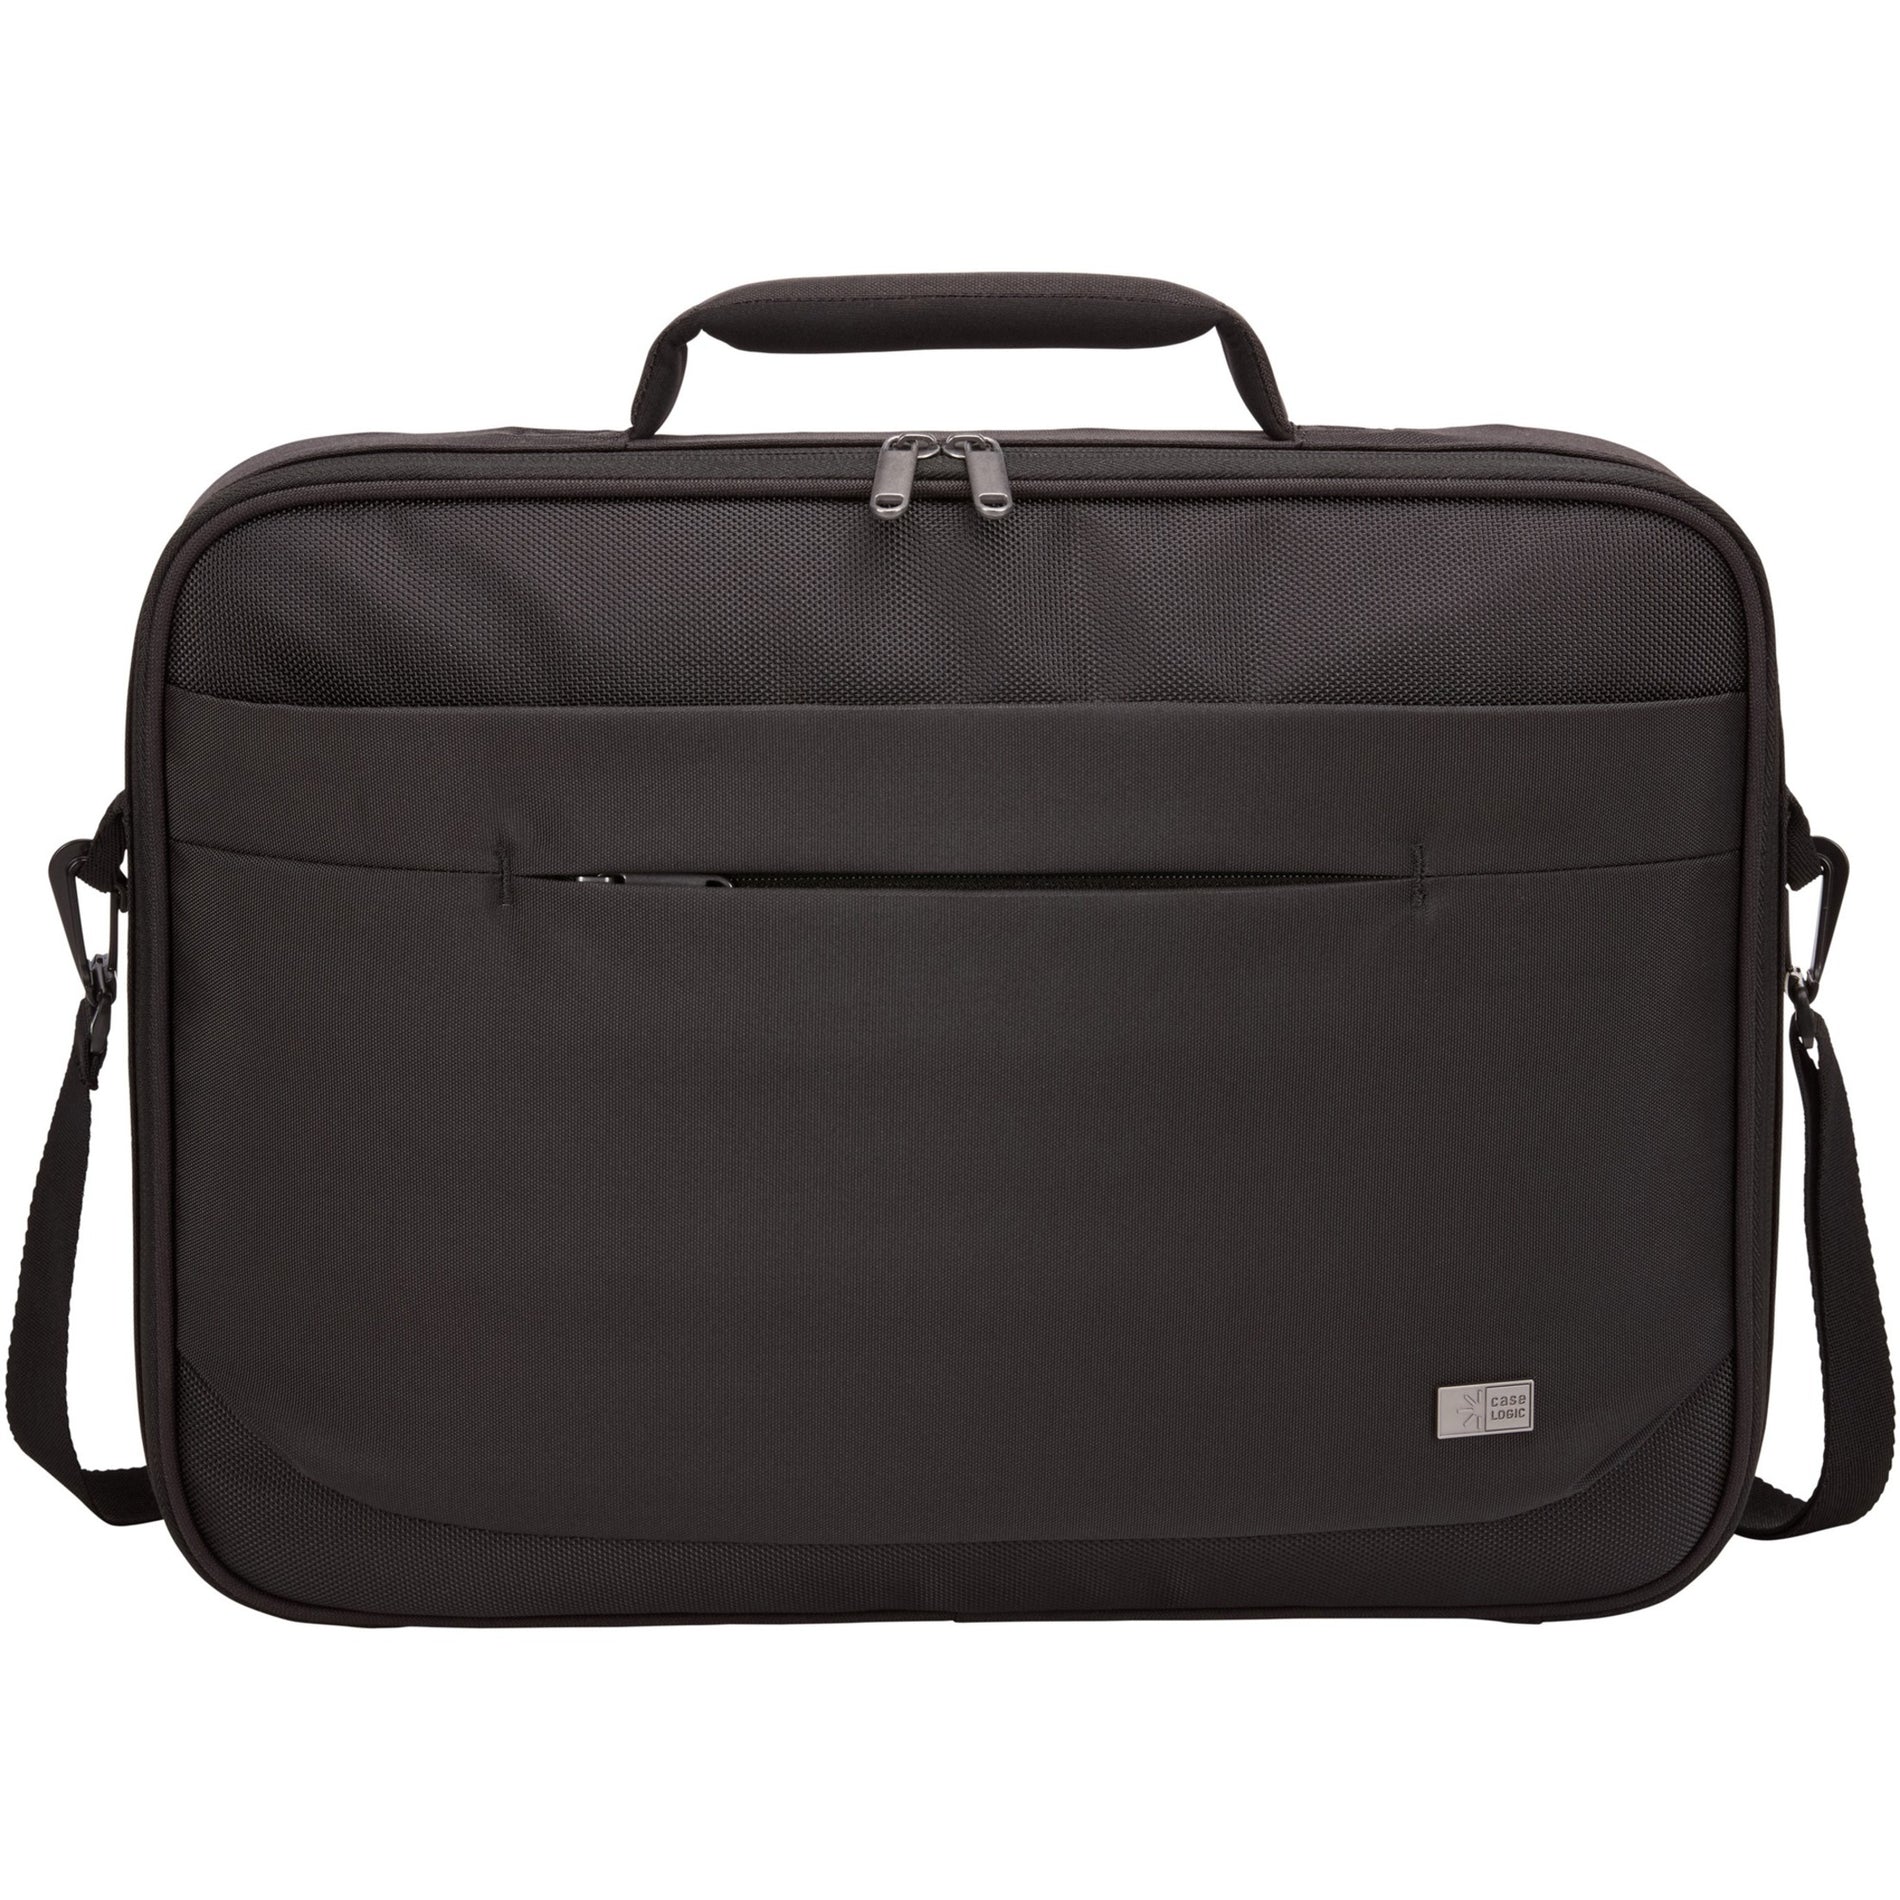 Case Logic 3203990 Advantage 15.6" Laptop Briefcase, Black - Stylish and Functional Carrying Case for Electronics, Tablets, and Notebooks